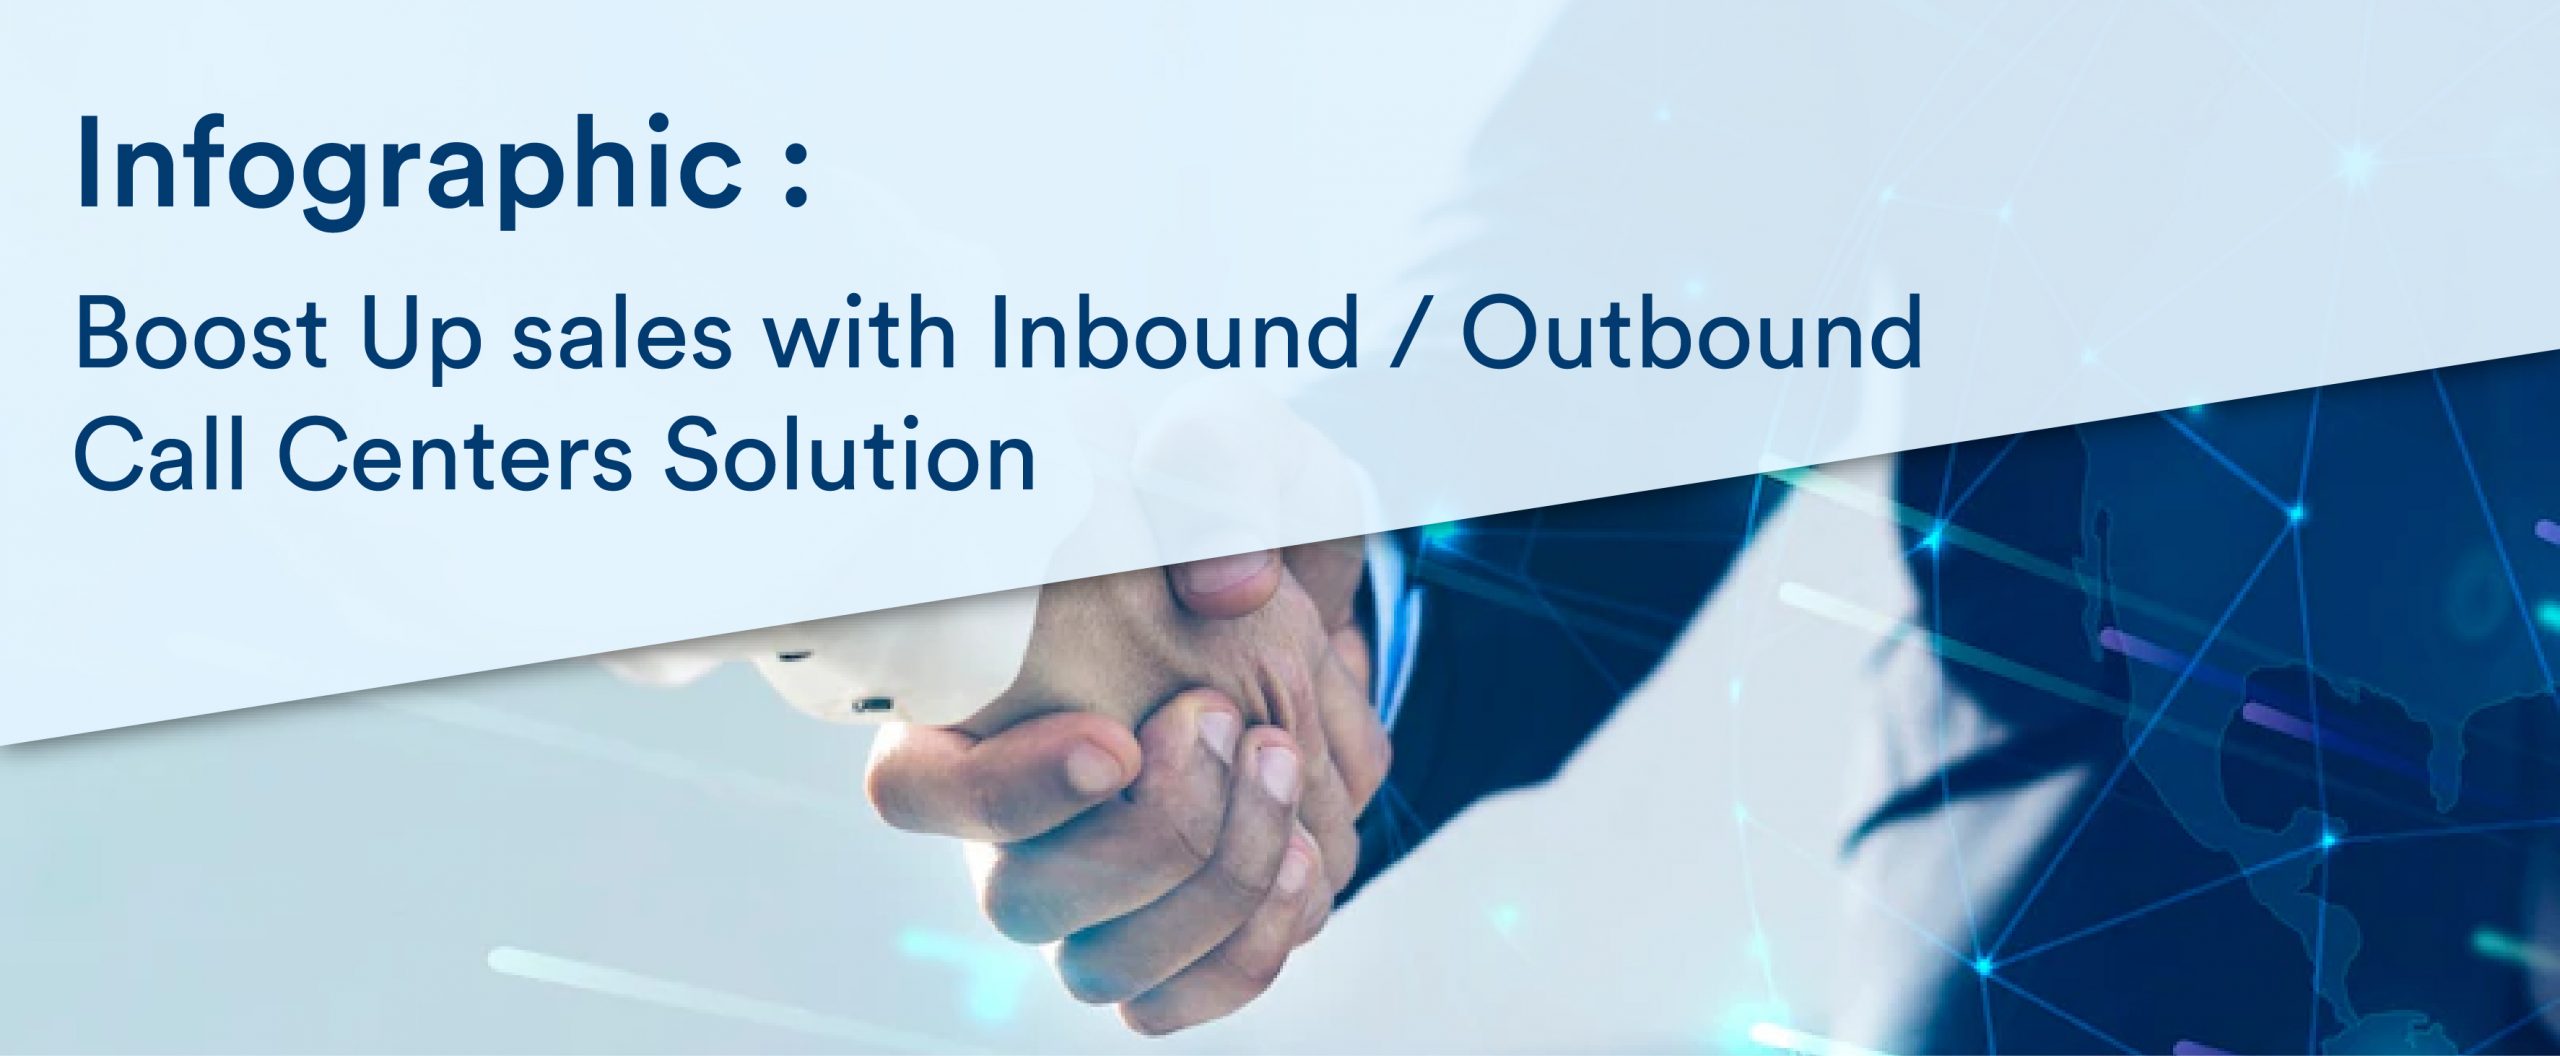 Inbound/Outbound Call Centers Solution